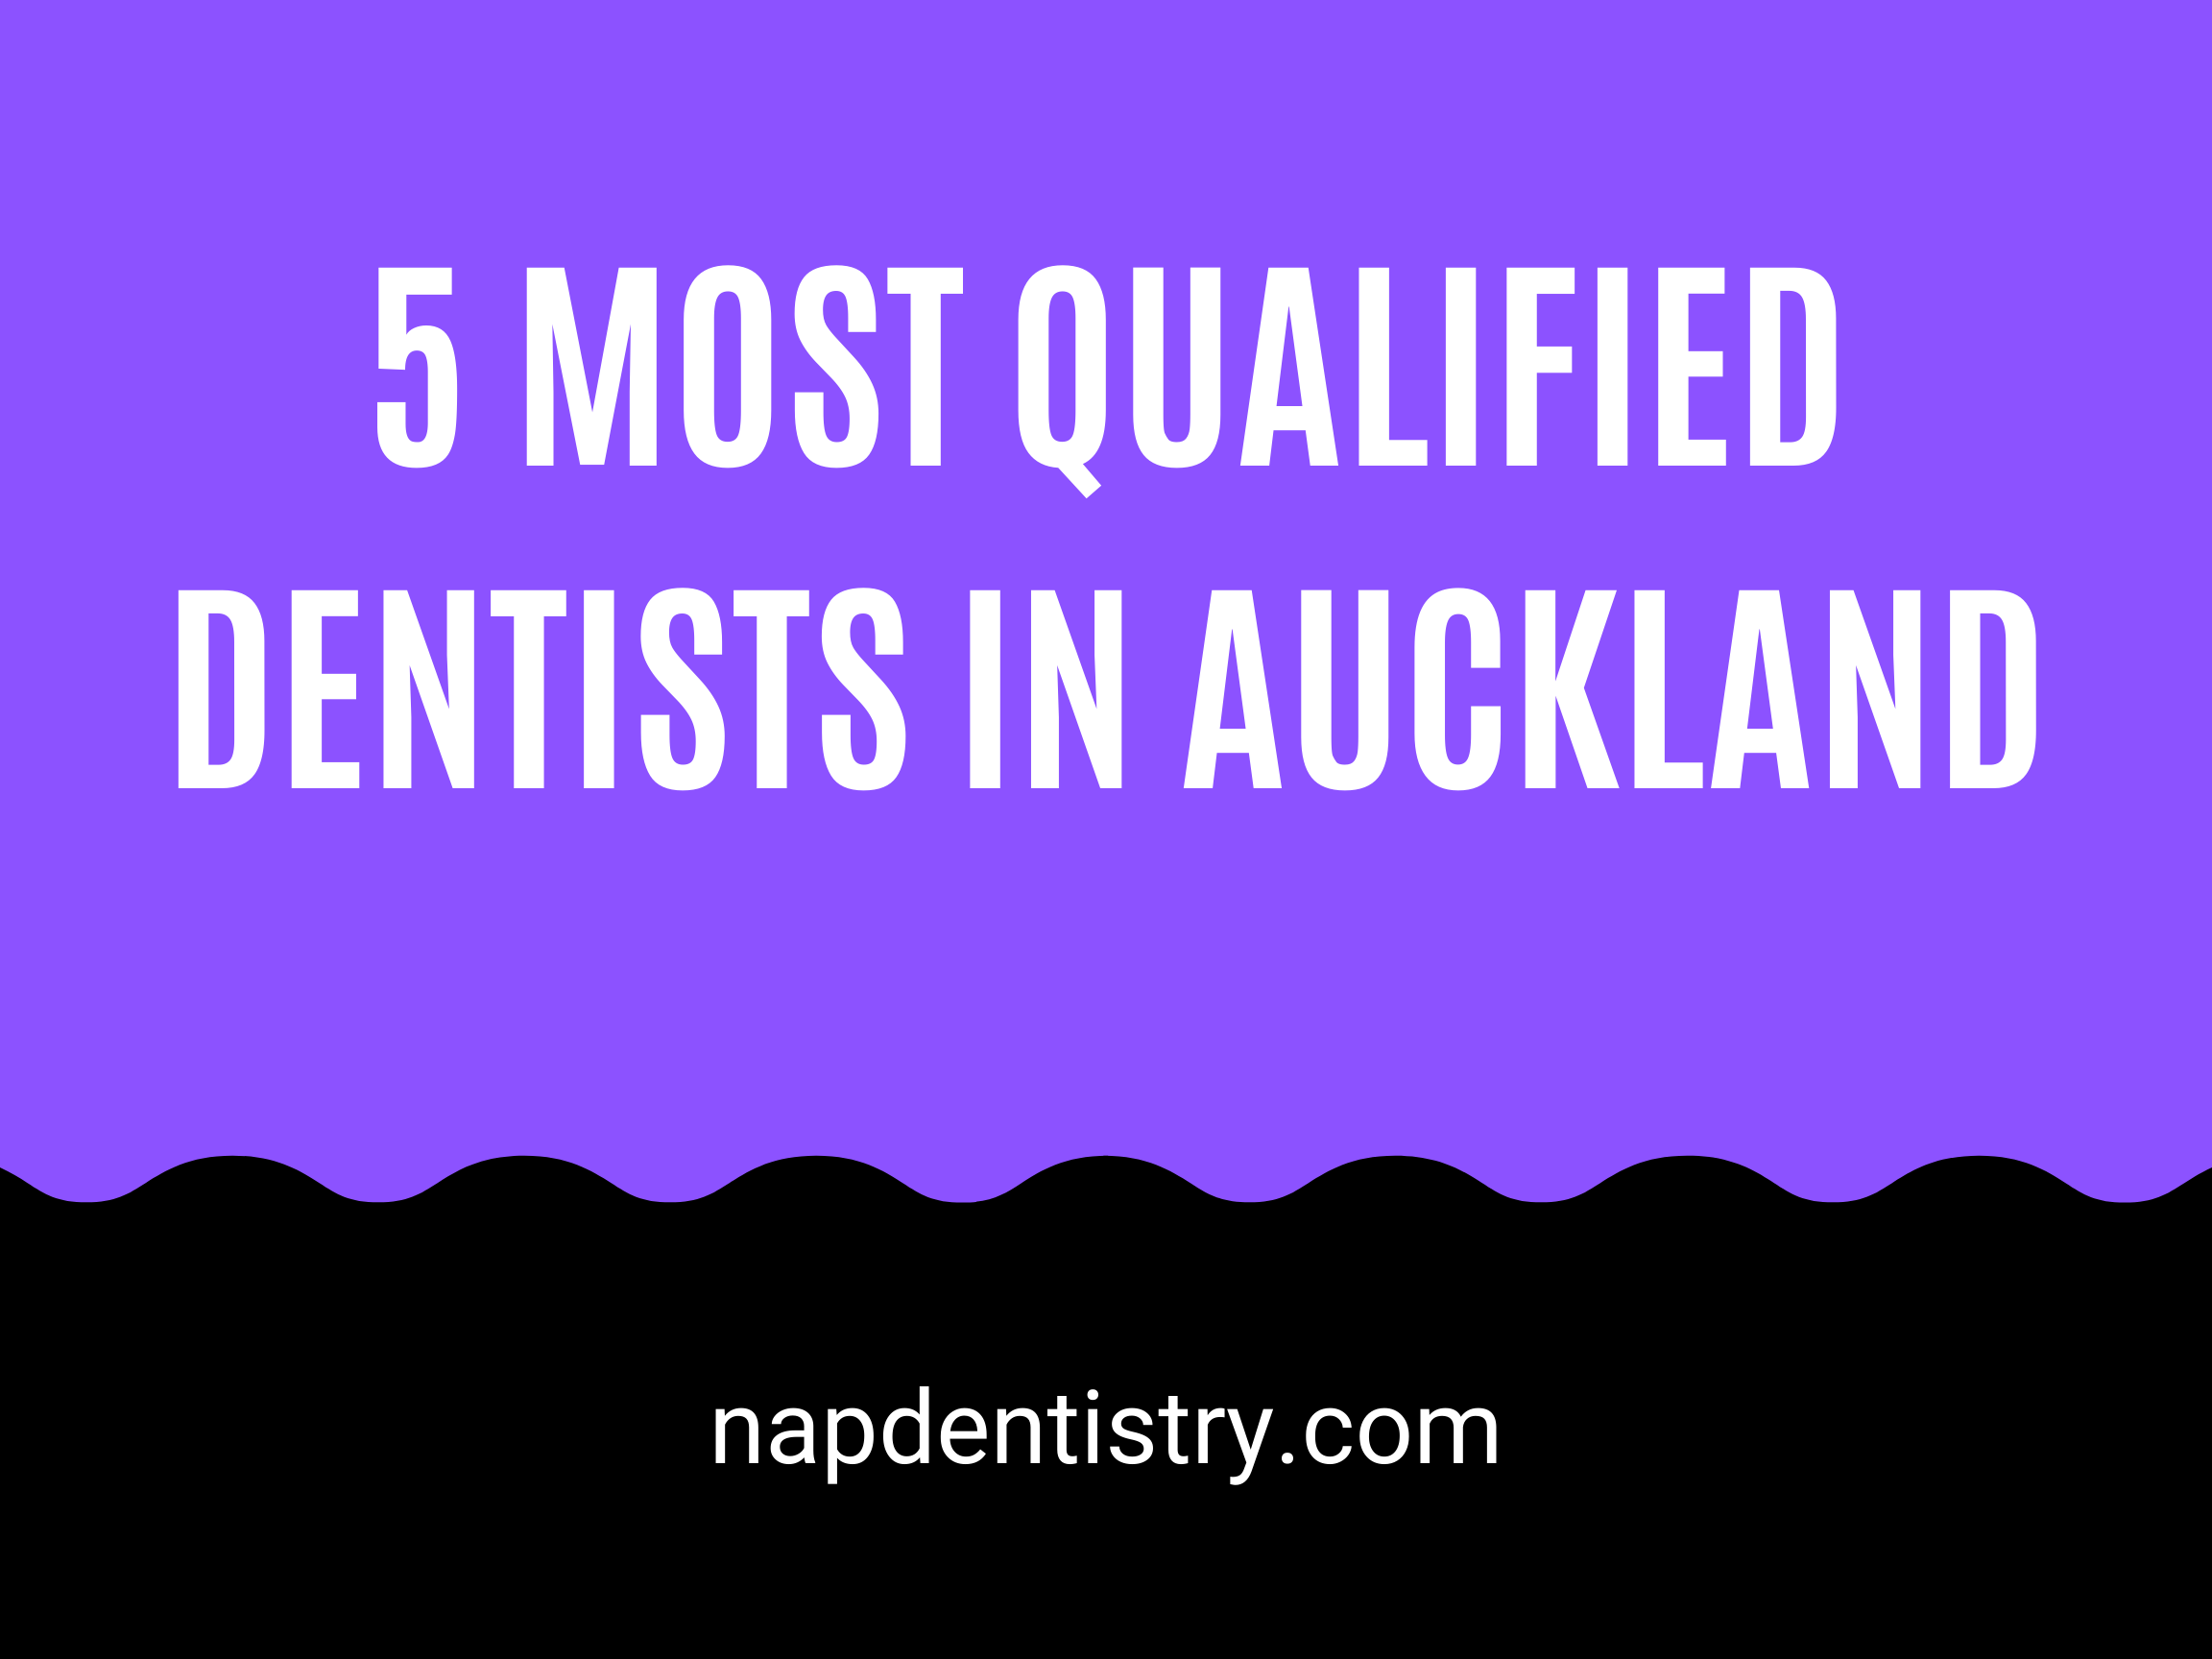 5 Most Qualified Dentists in Auckland